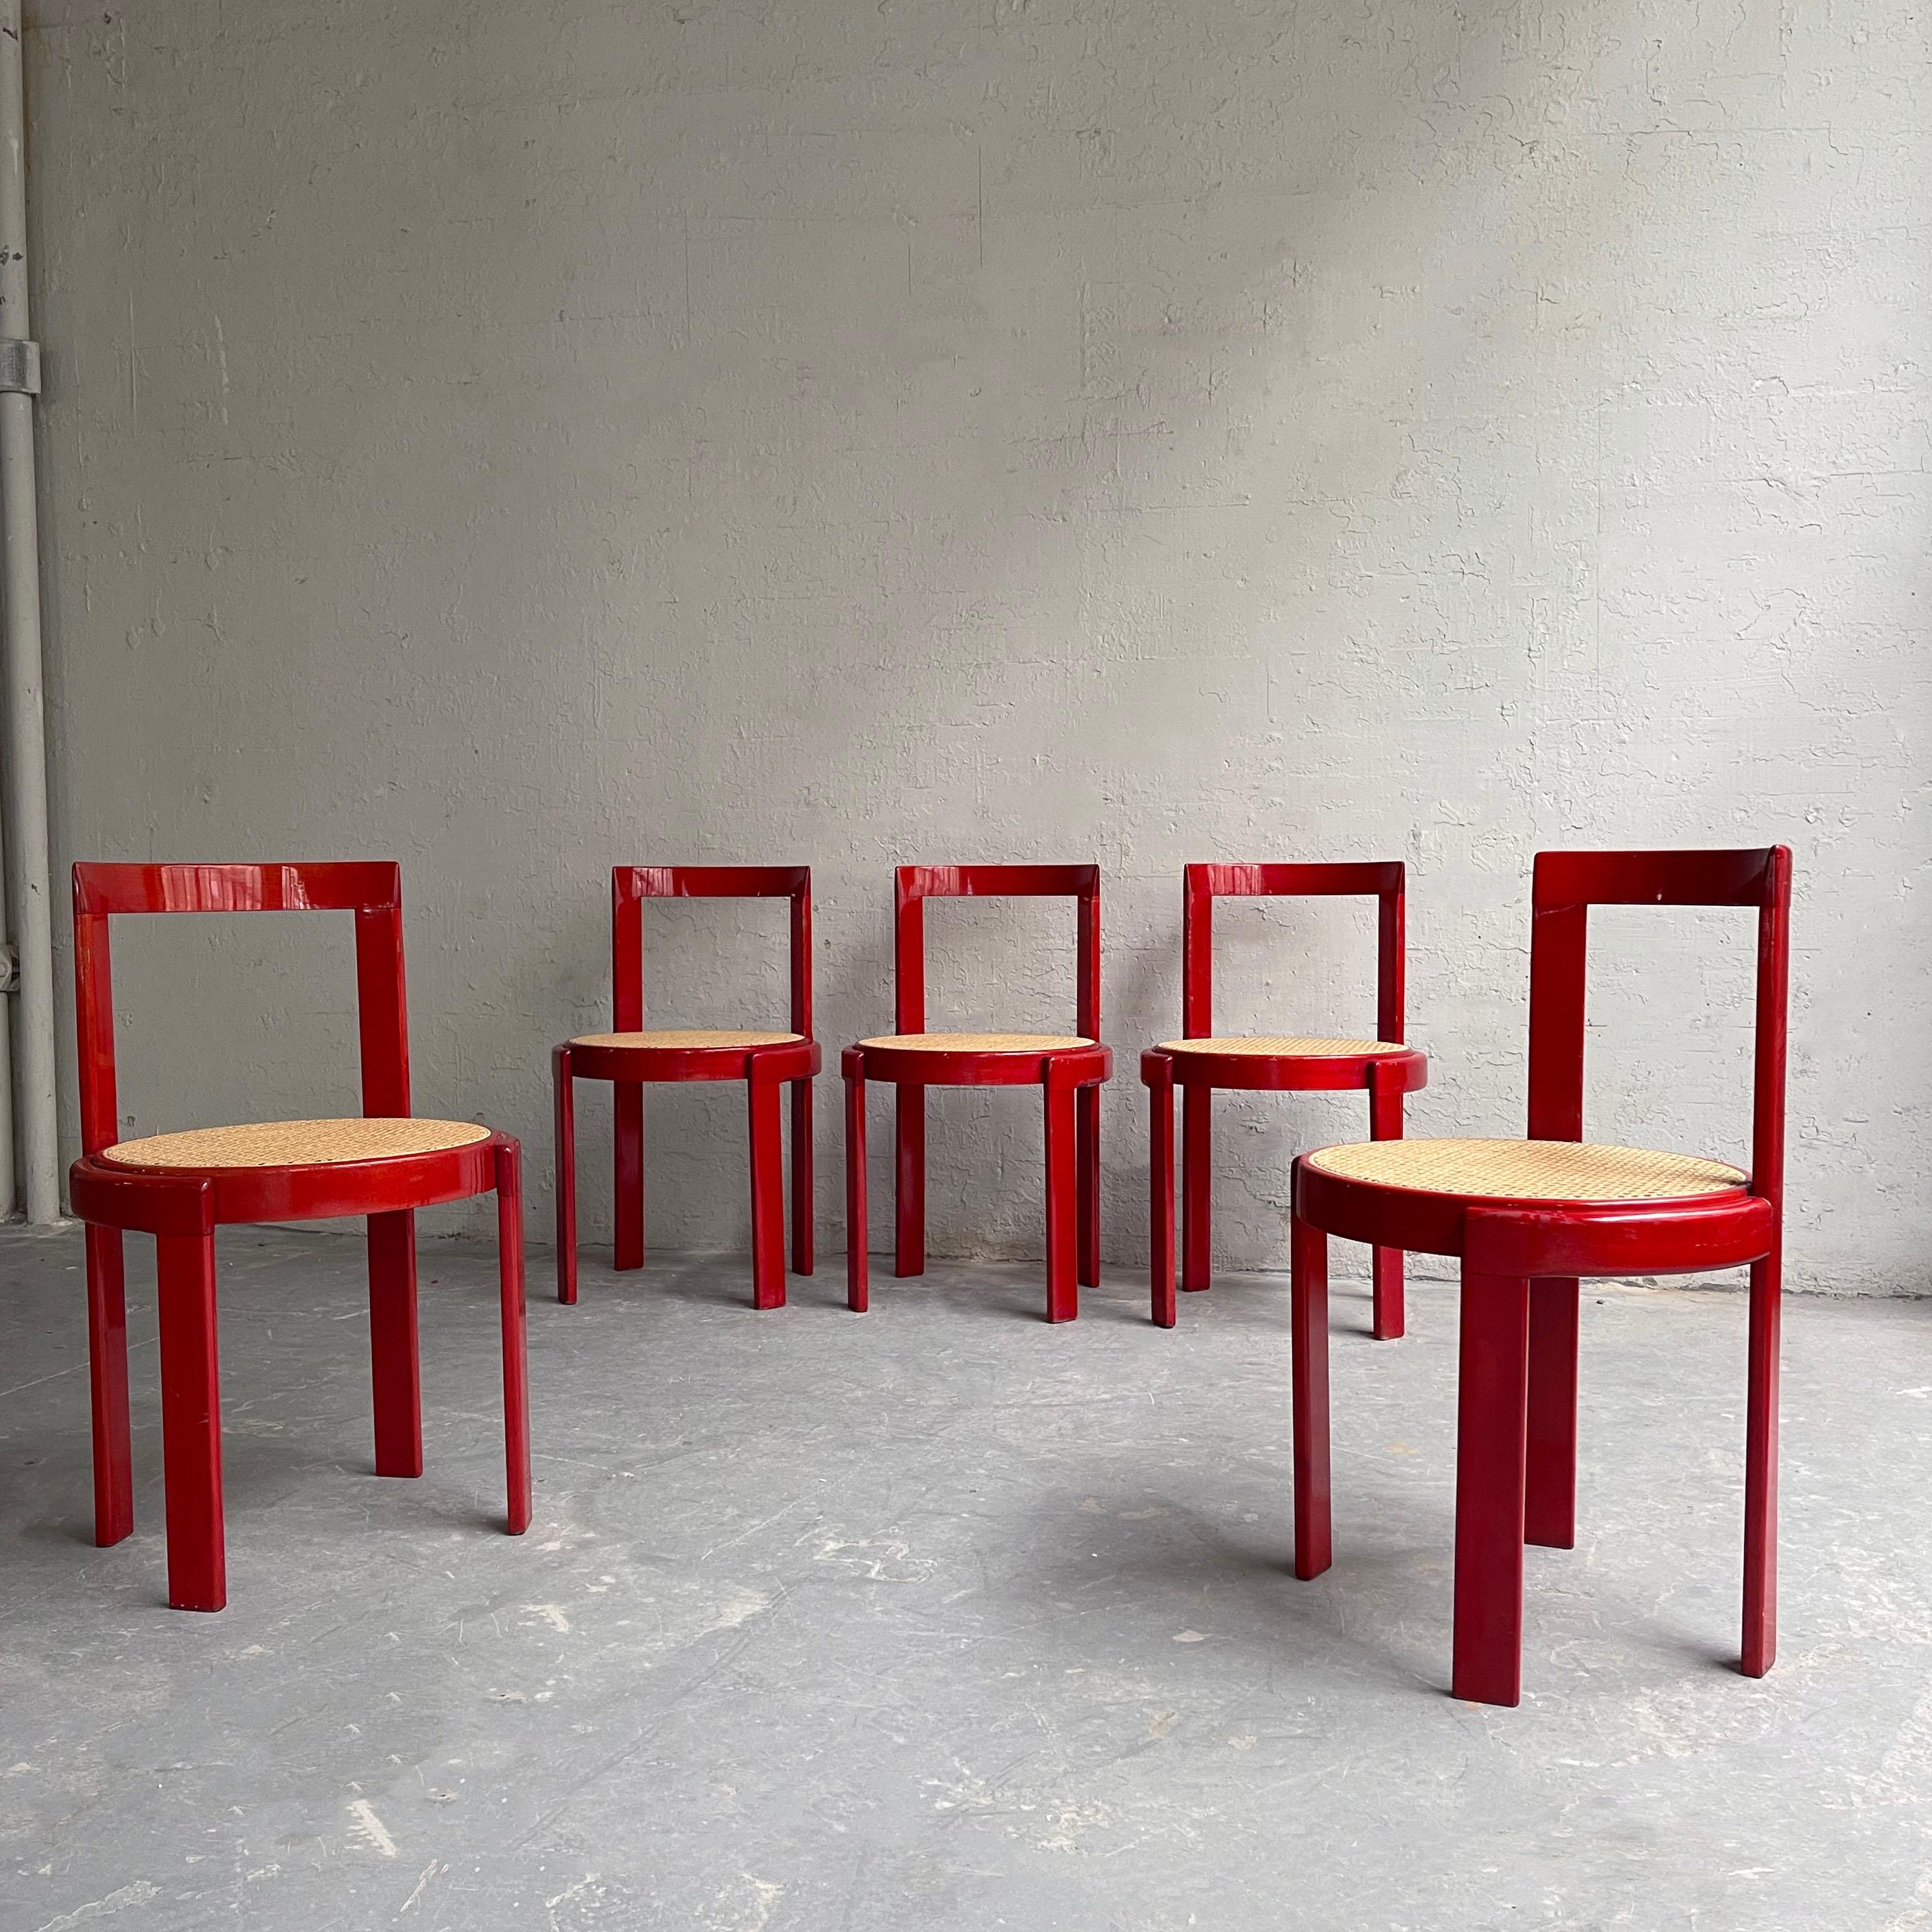 Post-Modern Italian Modernist Circular Bentwood And Cane Dining Chairs Set Of 6 For Sale